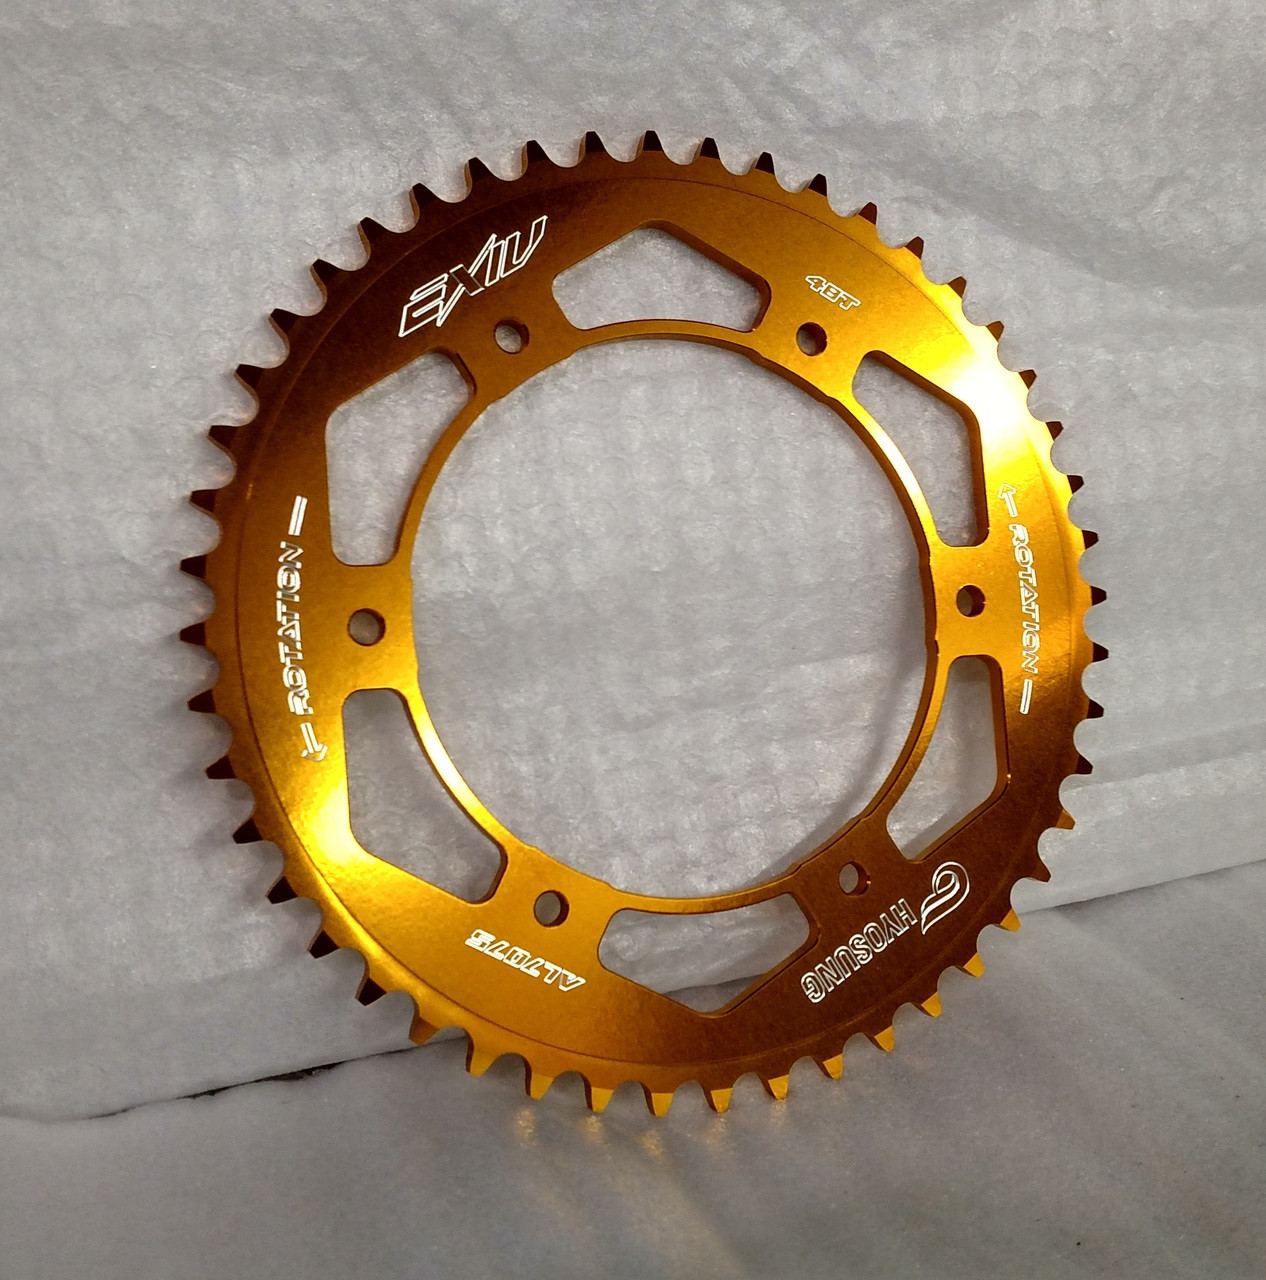 Anodized Gold Rear Sprocket for Hyosung.